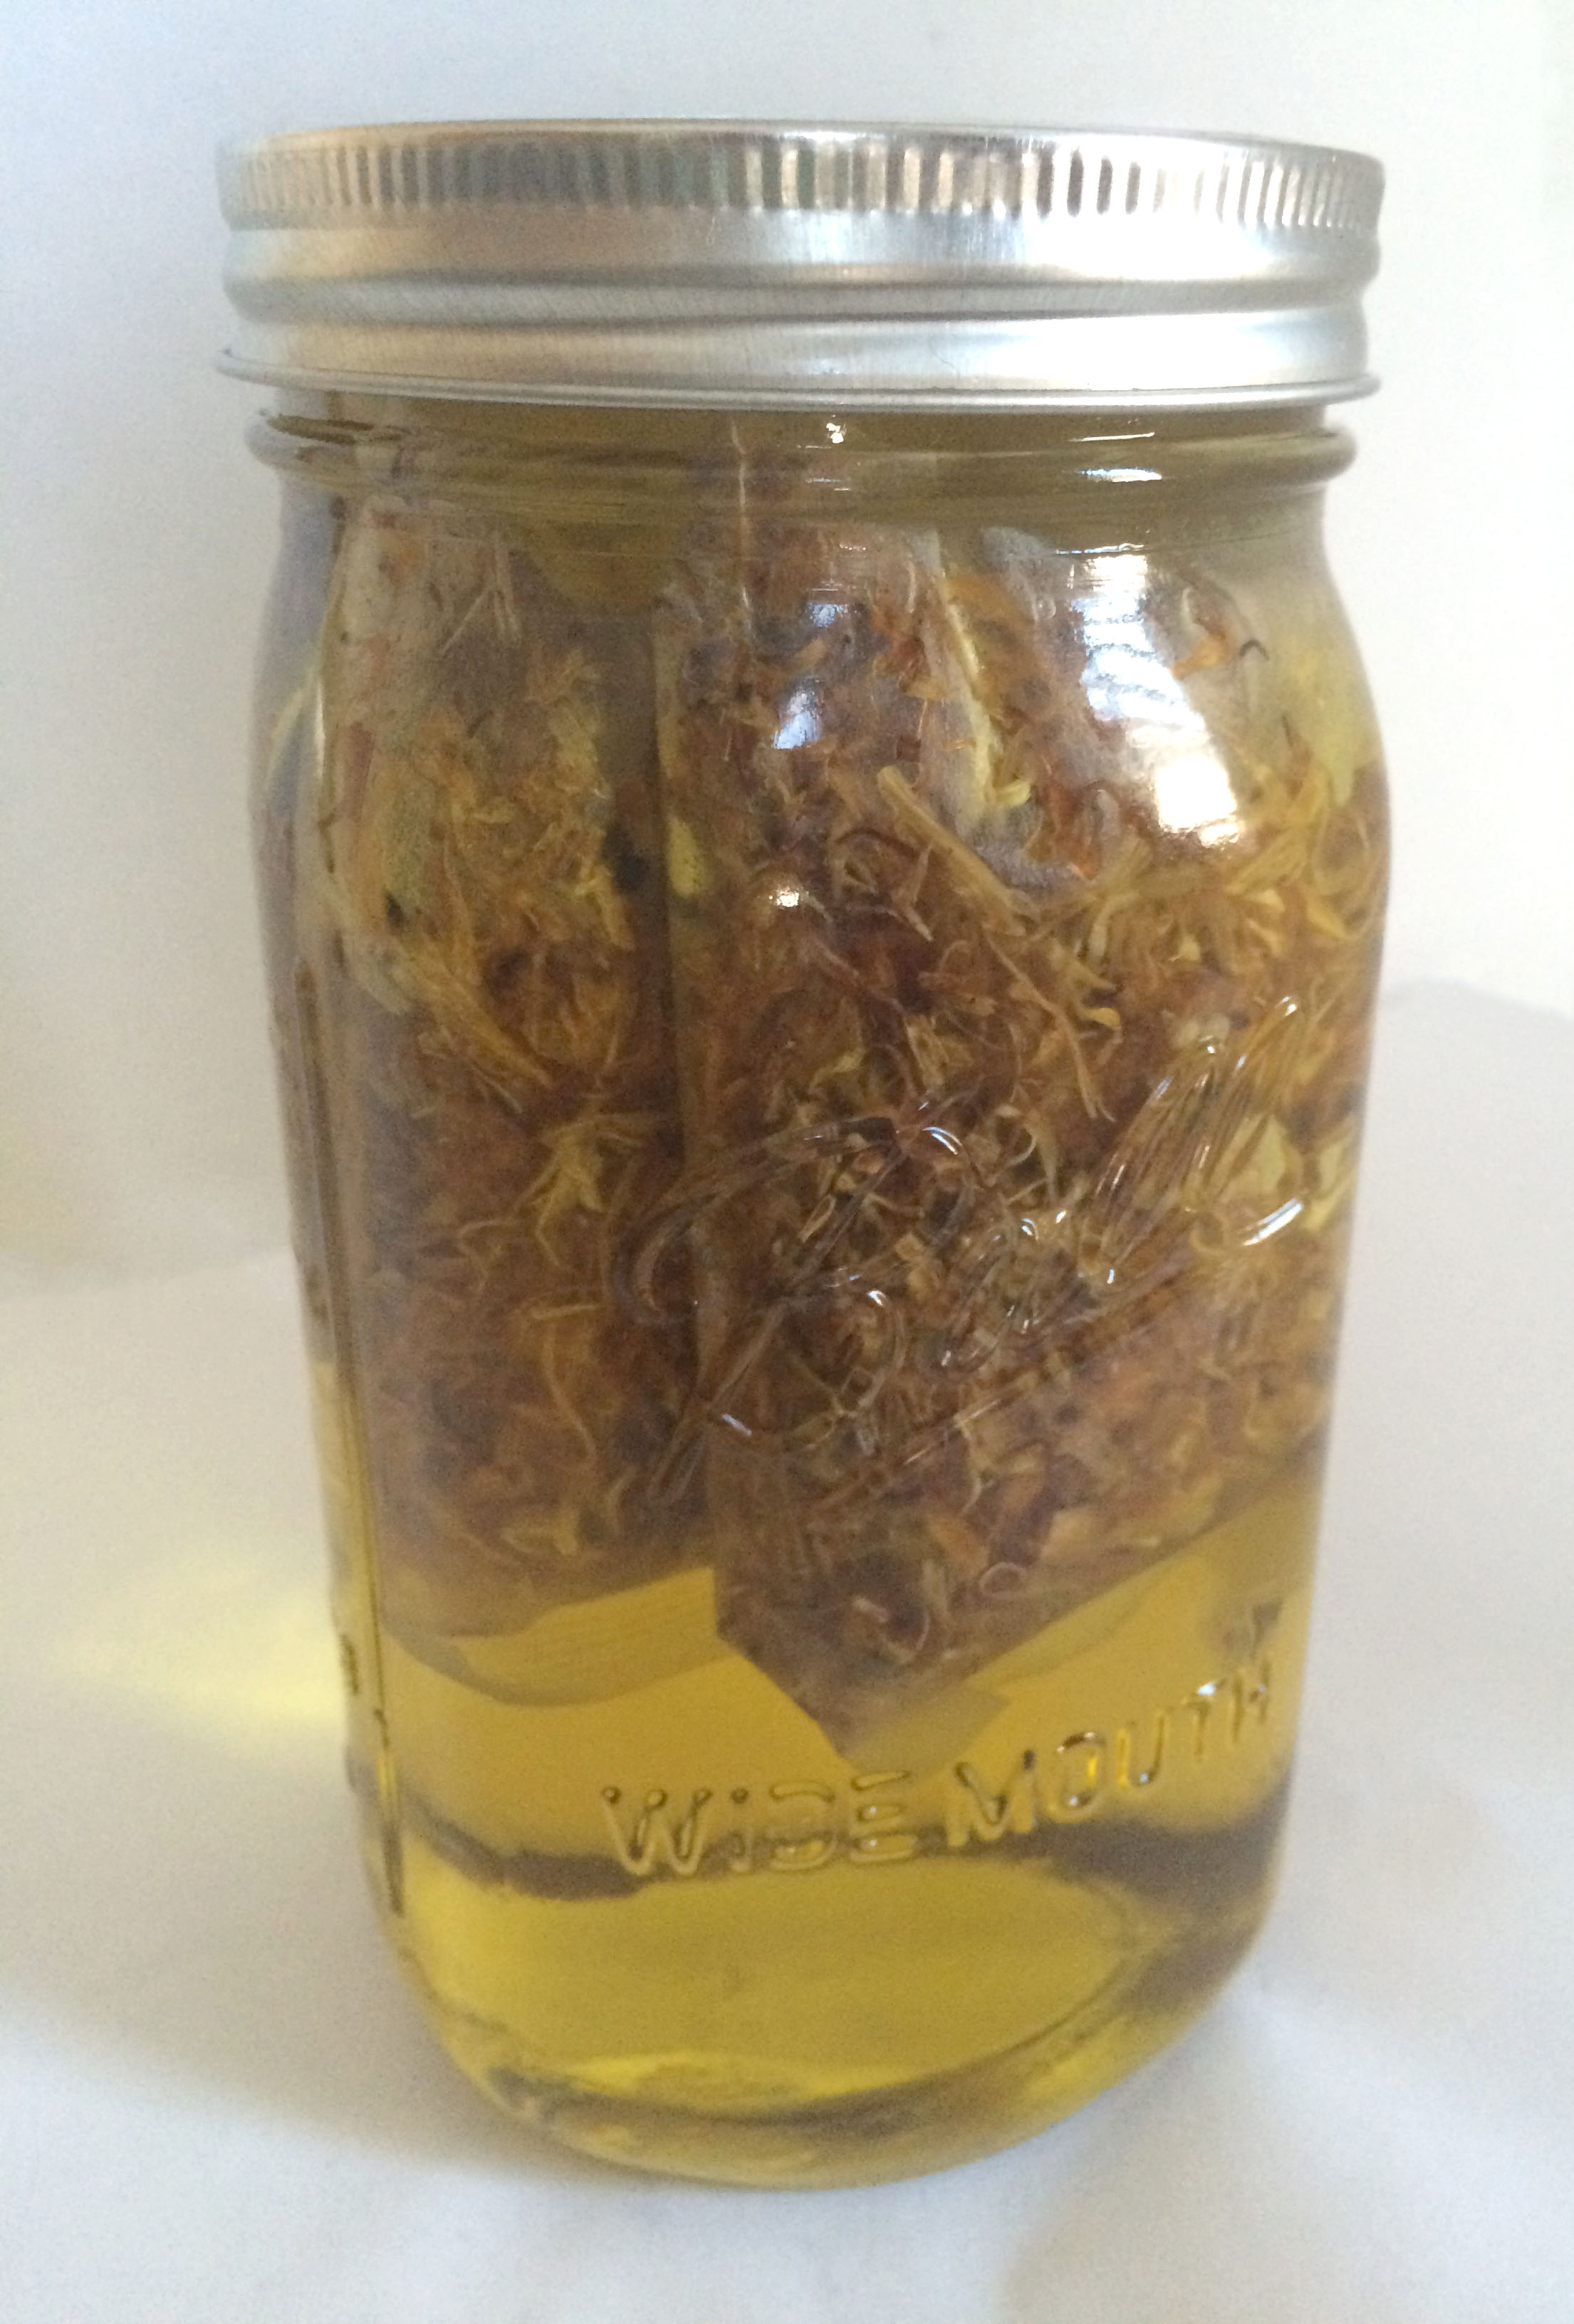 Infusing Your Own Oils for Soap Making - A Chick And Her Garden